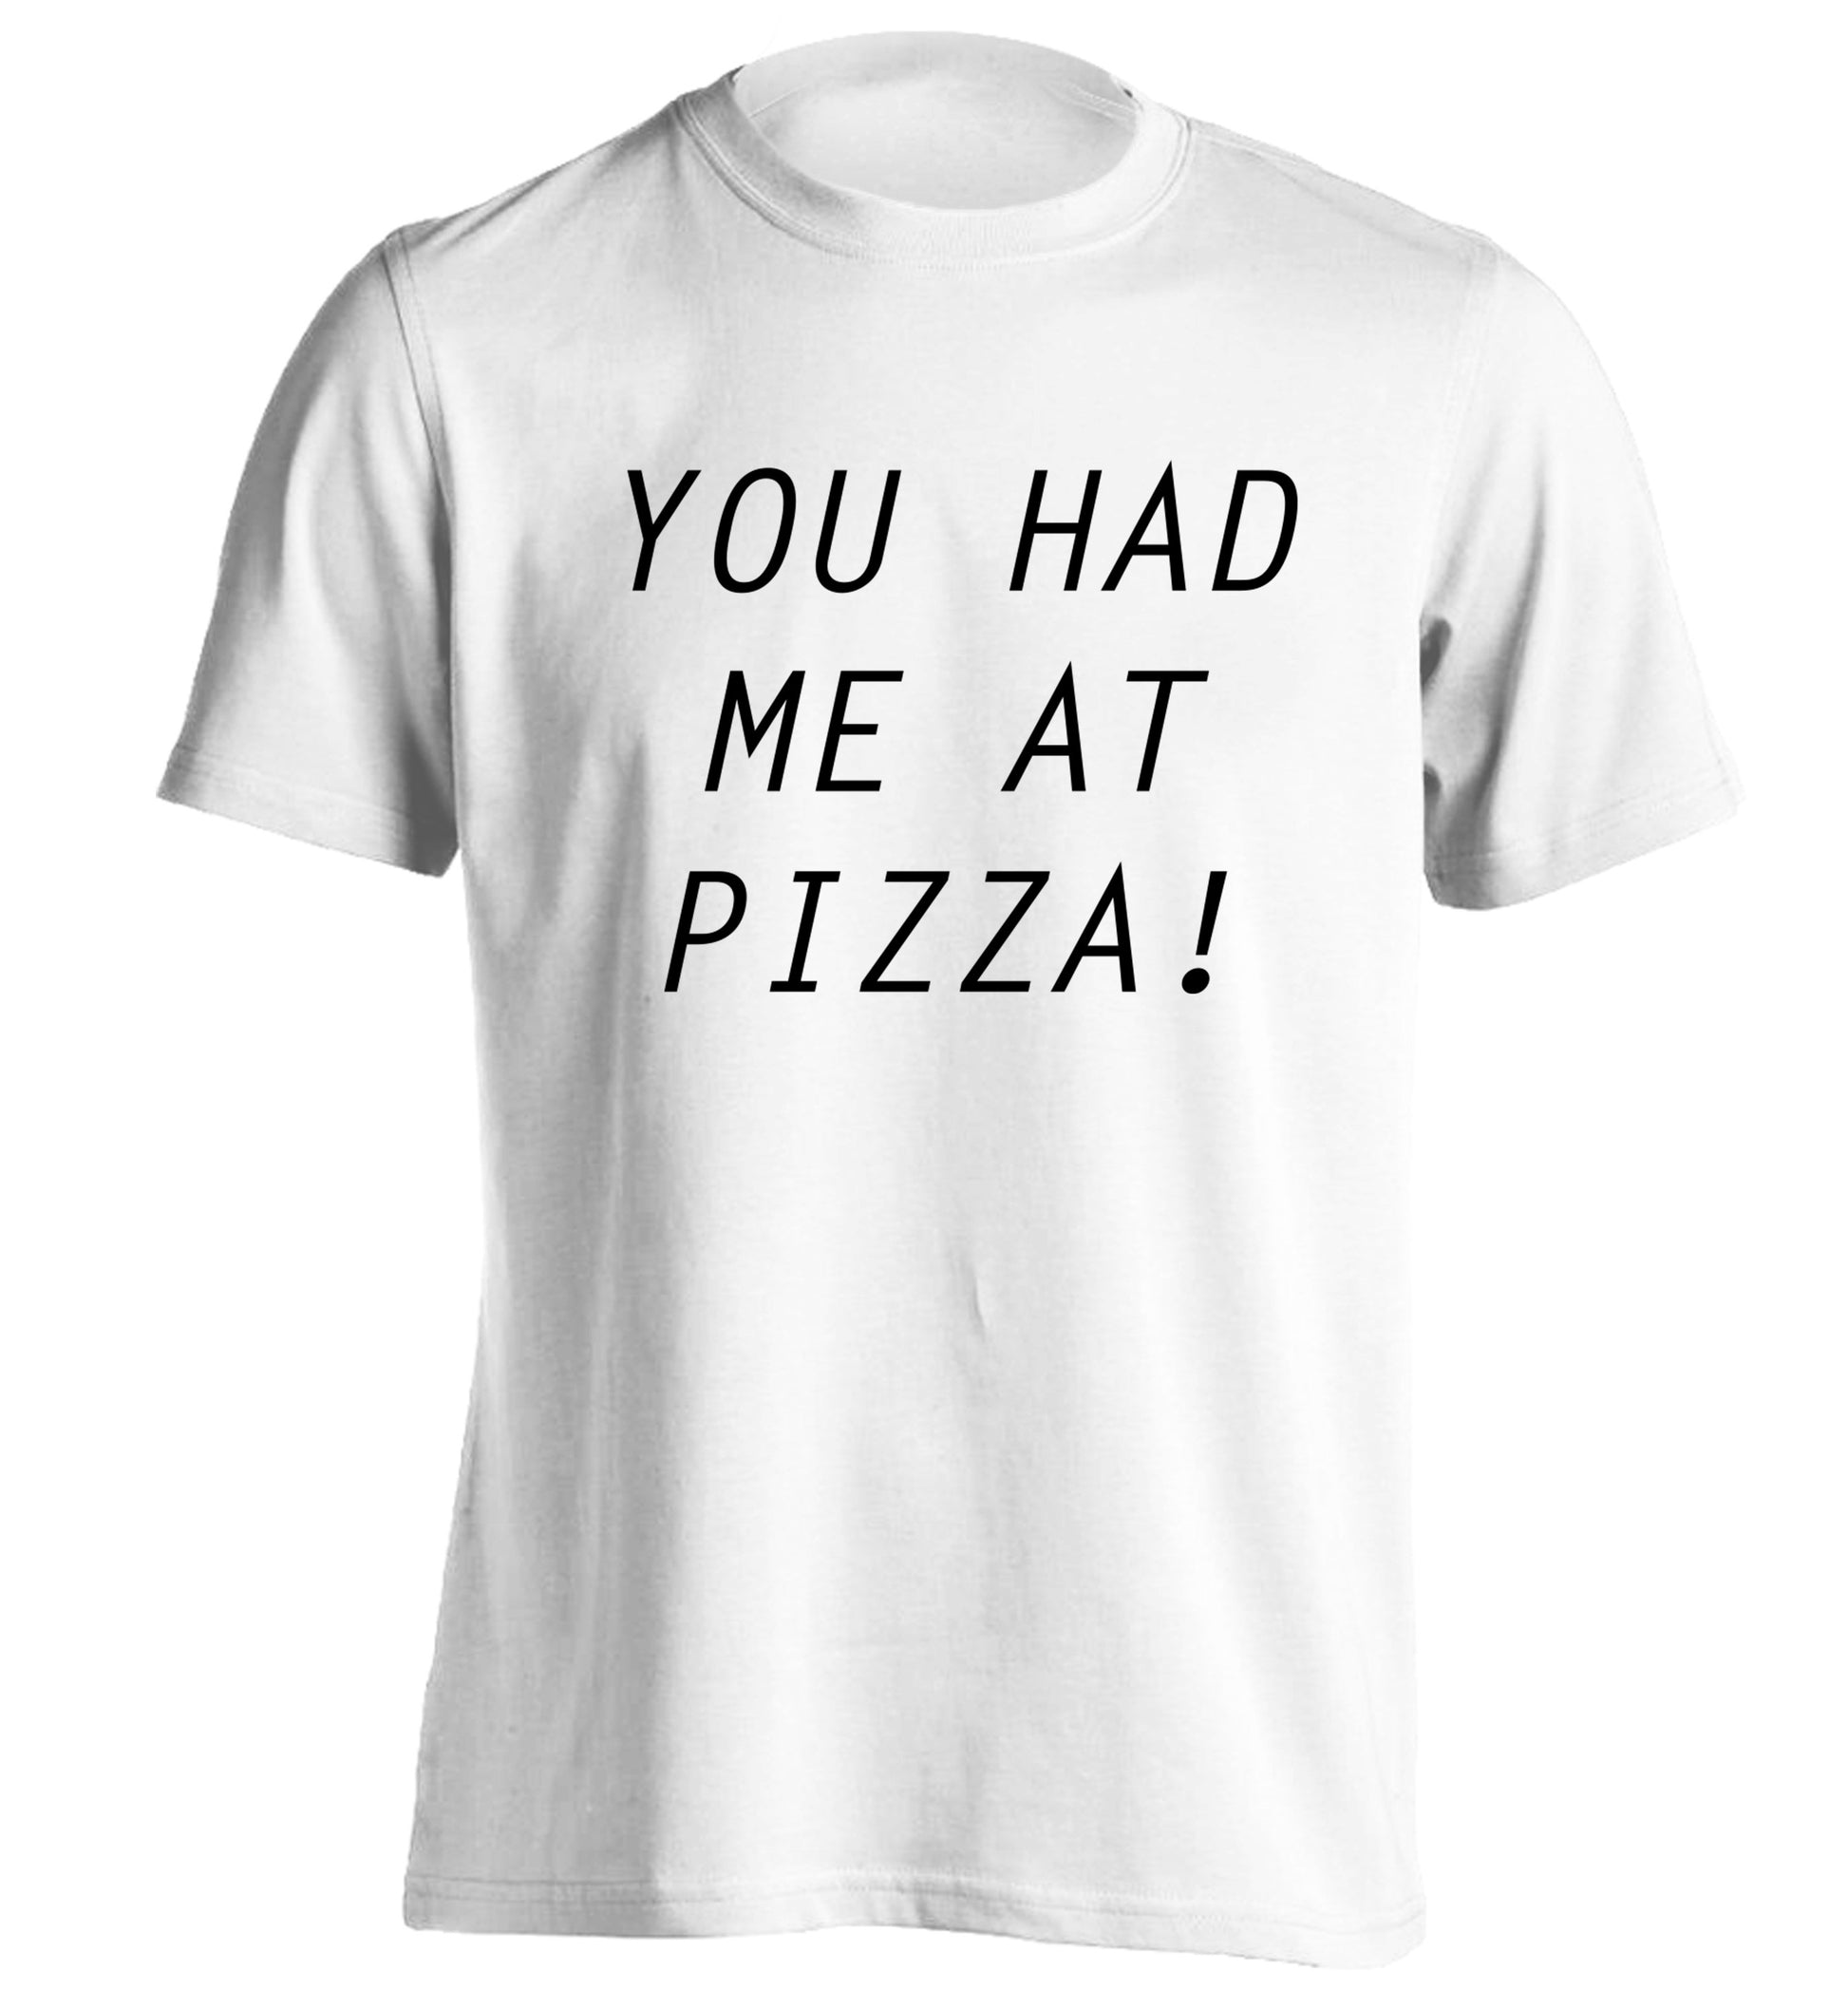 You had me at pizza adults unisex white Tshirt 2XL